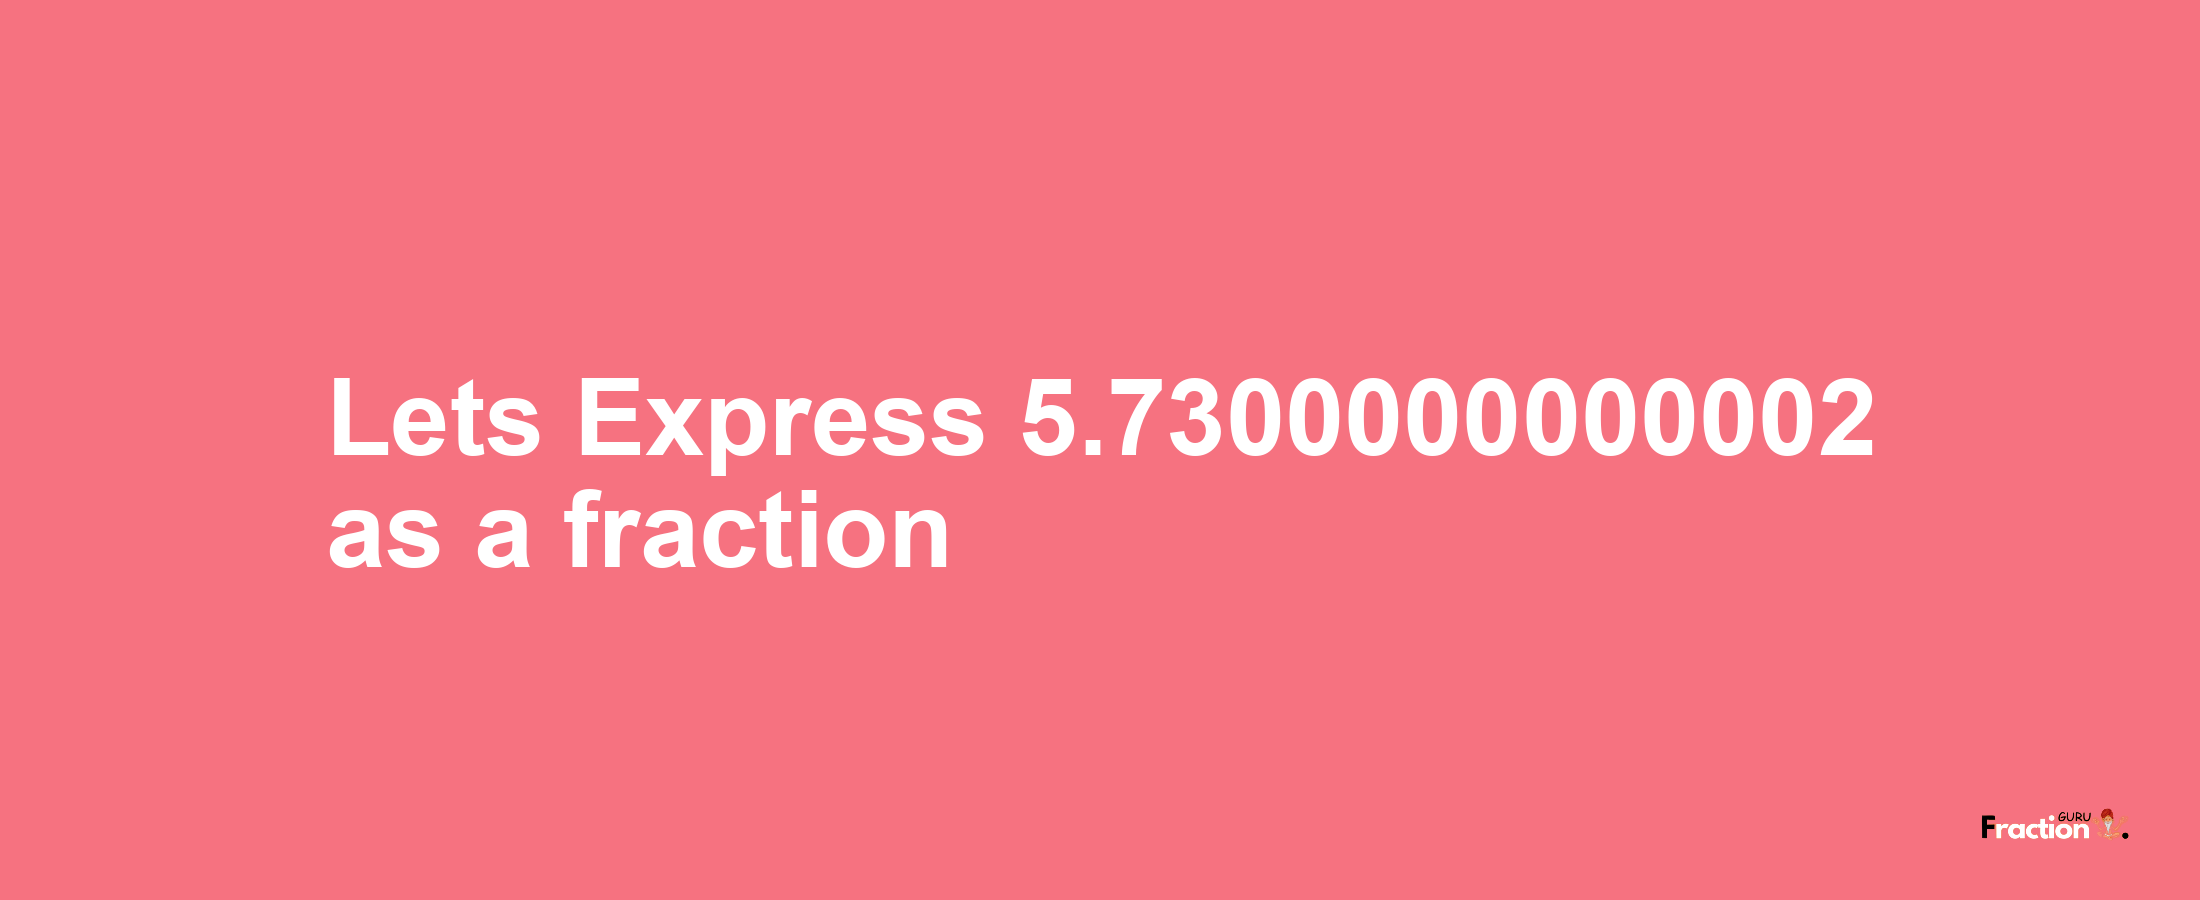 Lets Express 5.7300000000002 as afraction